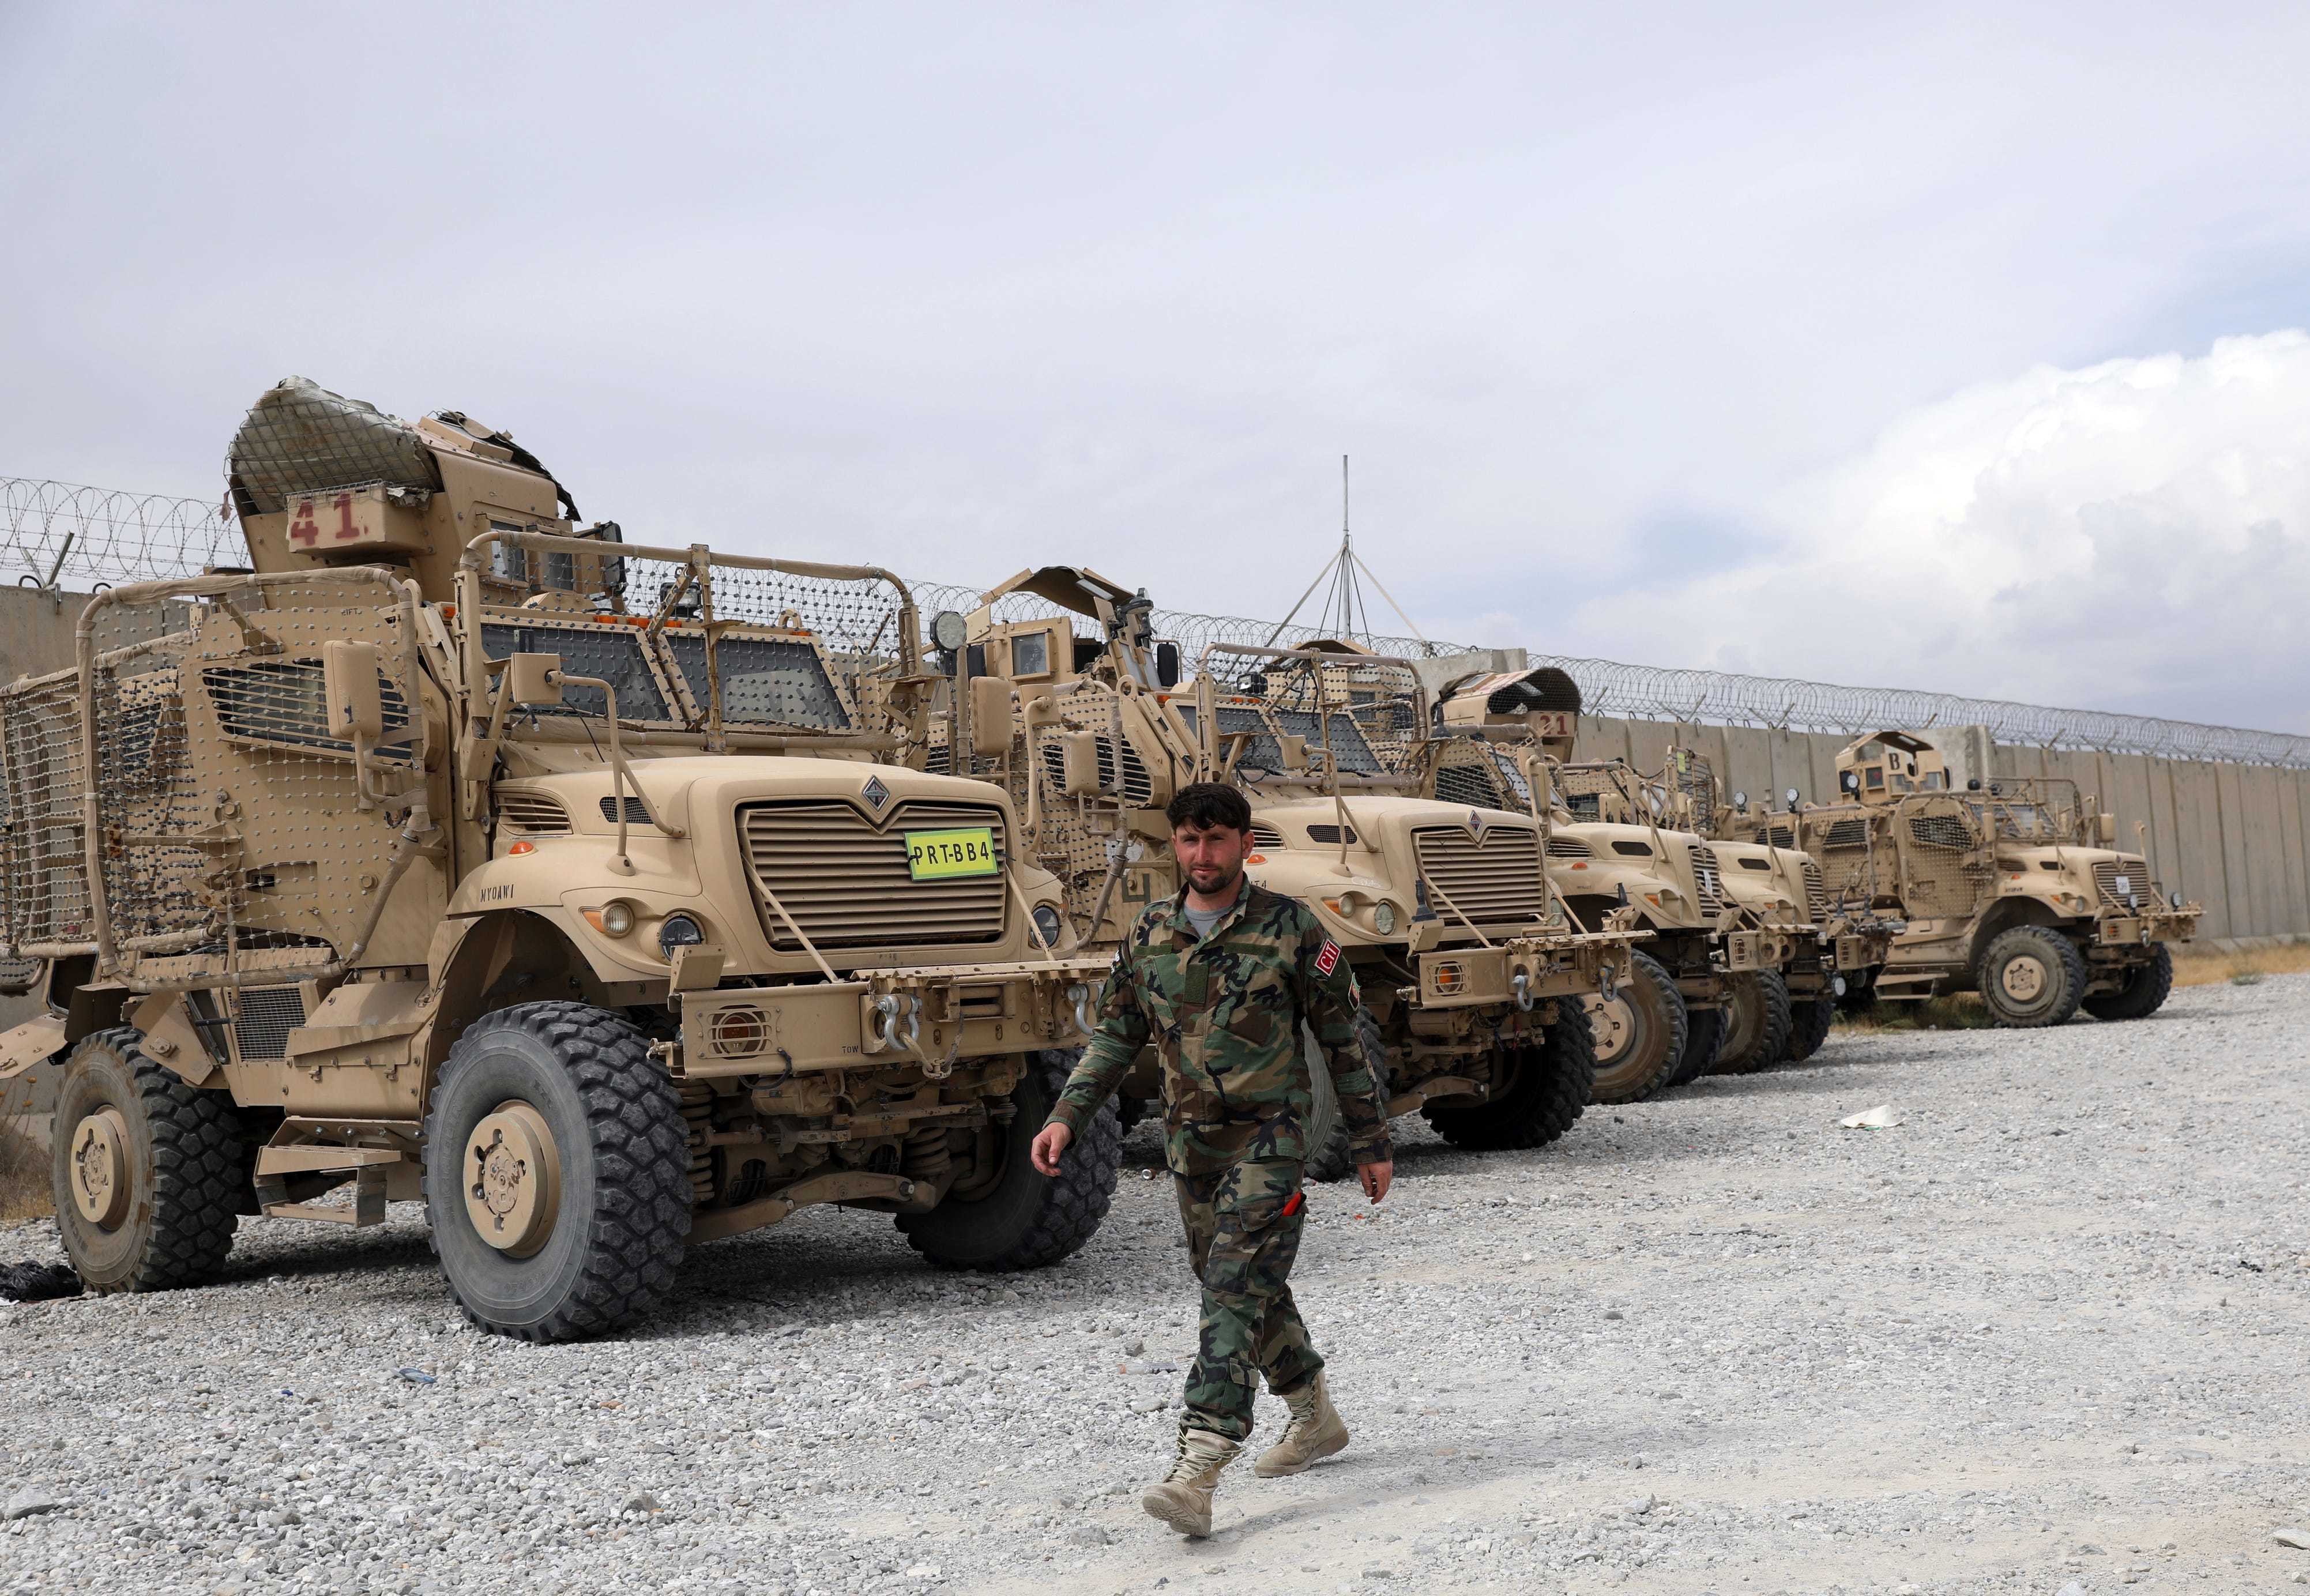 An Afghan soldier walks past several large beige army vehicles.